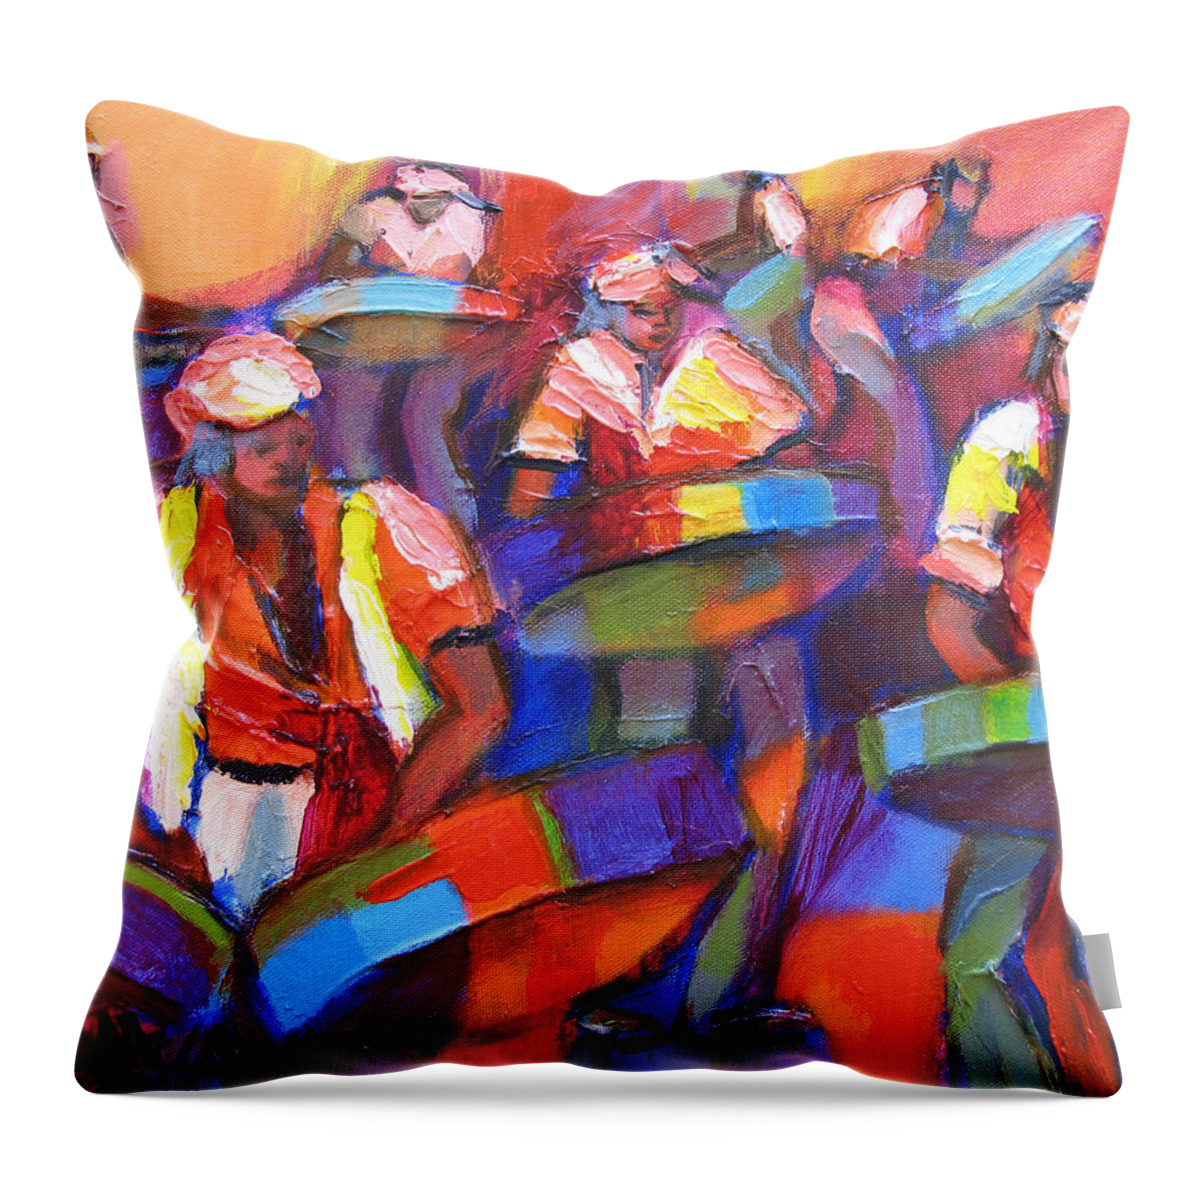 Steel Throw Pillow featuring the painting Colour Pan 2 by Cynthia McLean